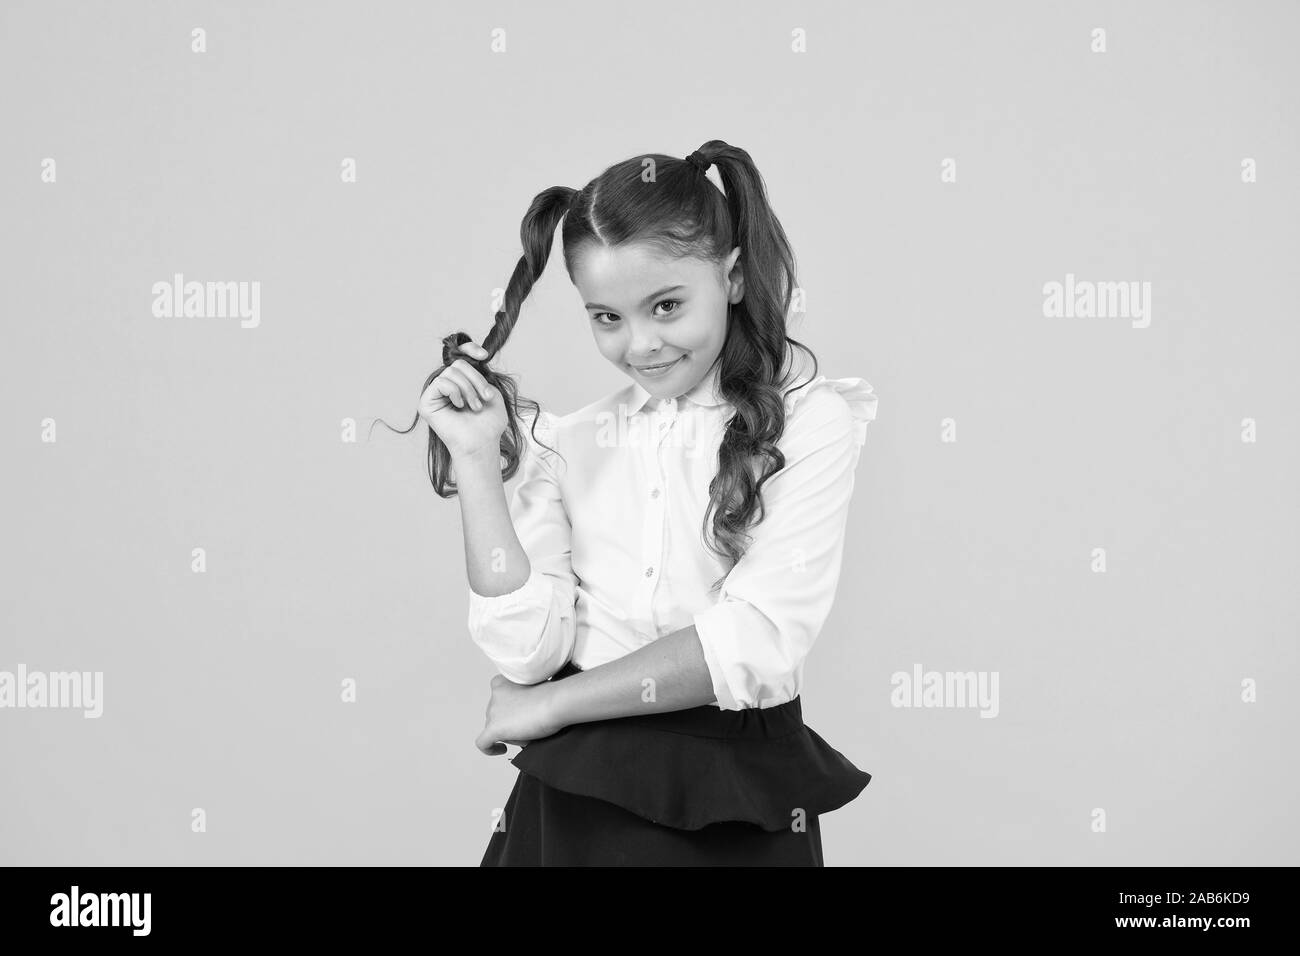 Modest hairstyle. Cute little schoolchild winding hairstyle around her  finger on yellow background. Fashion girl with long ponytail hairstyle in  formal style. Small kid styling hairstyle for school Stock Photo - Alamy